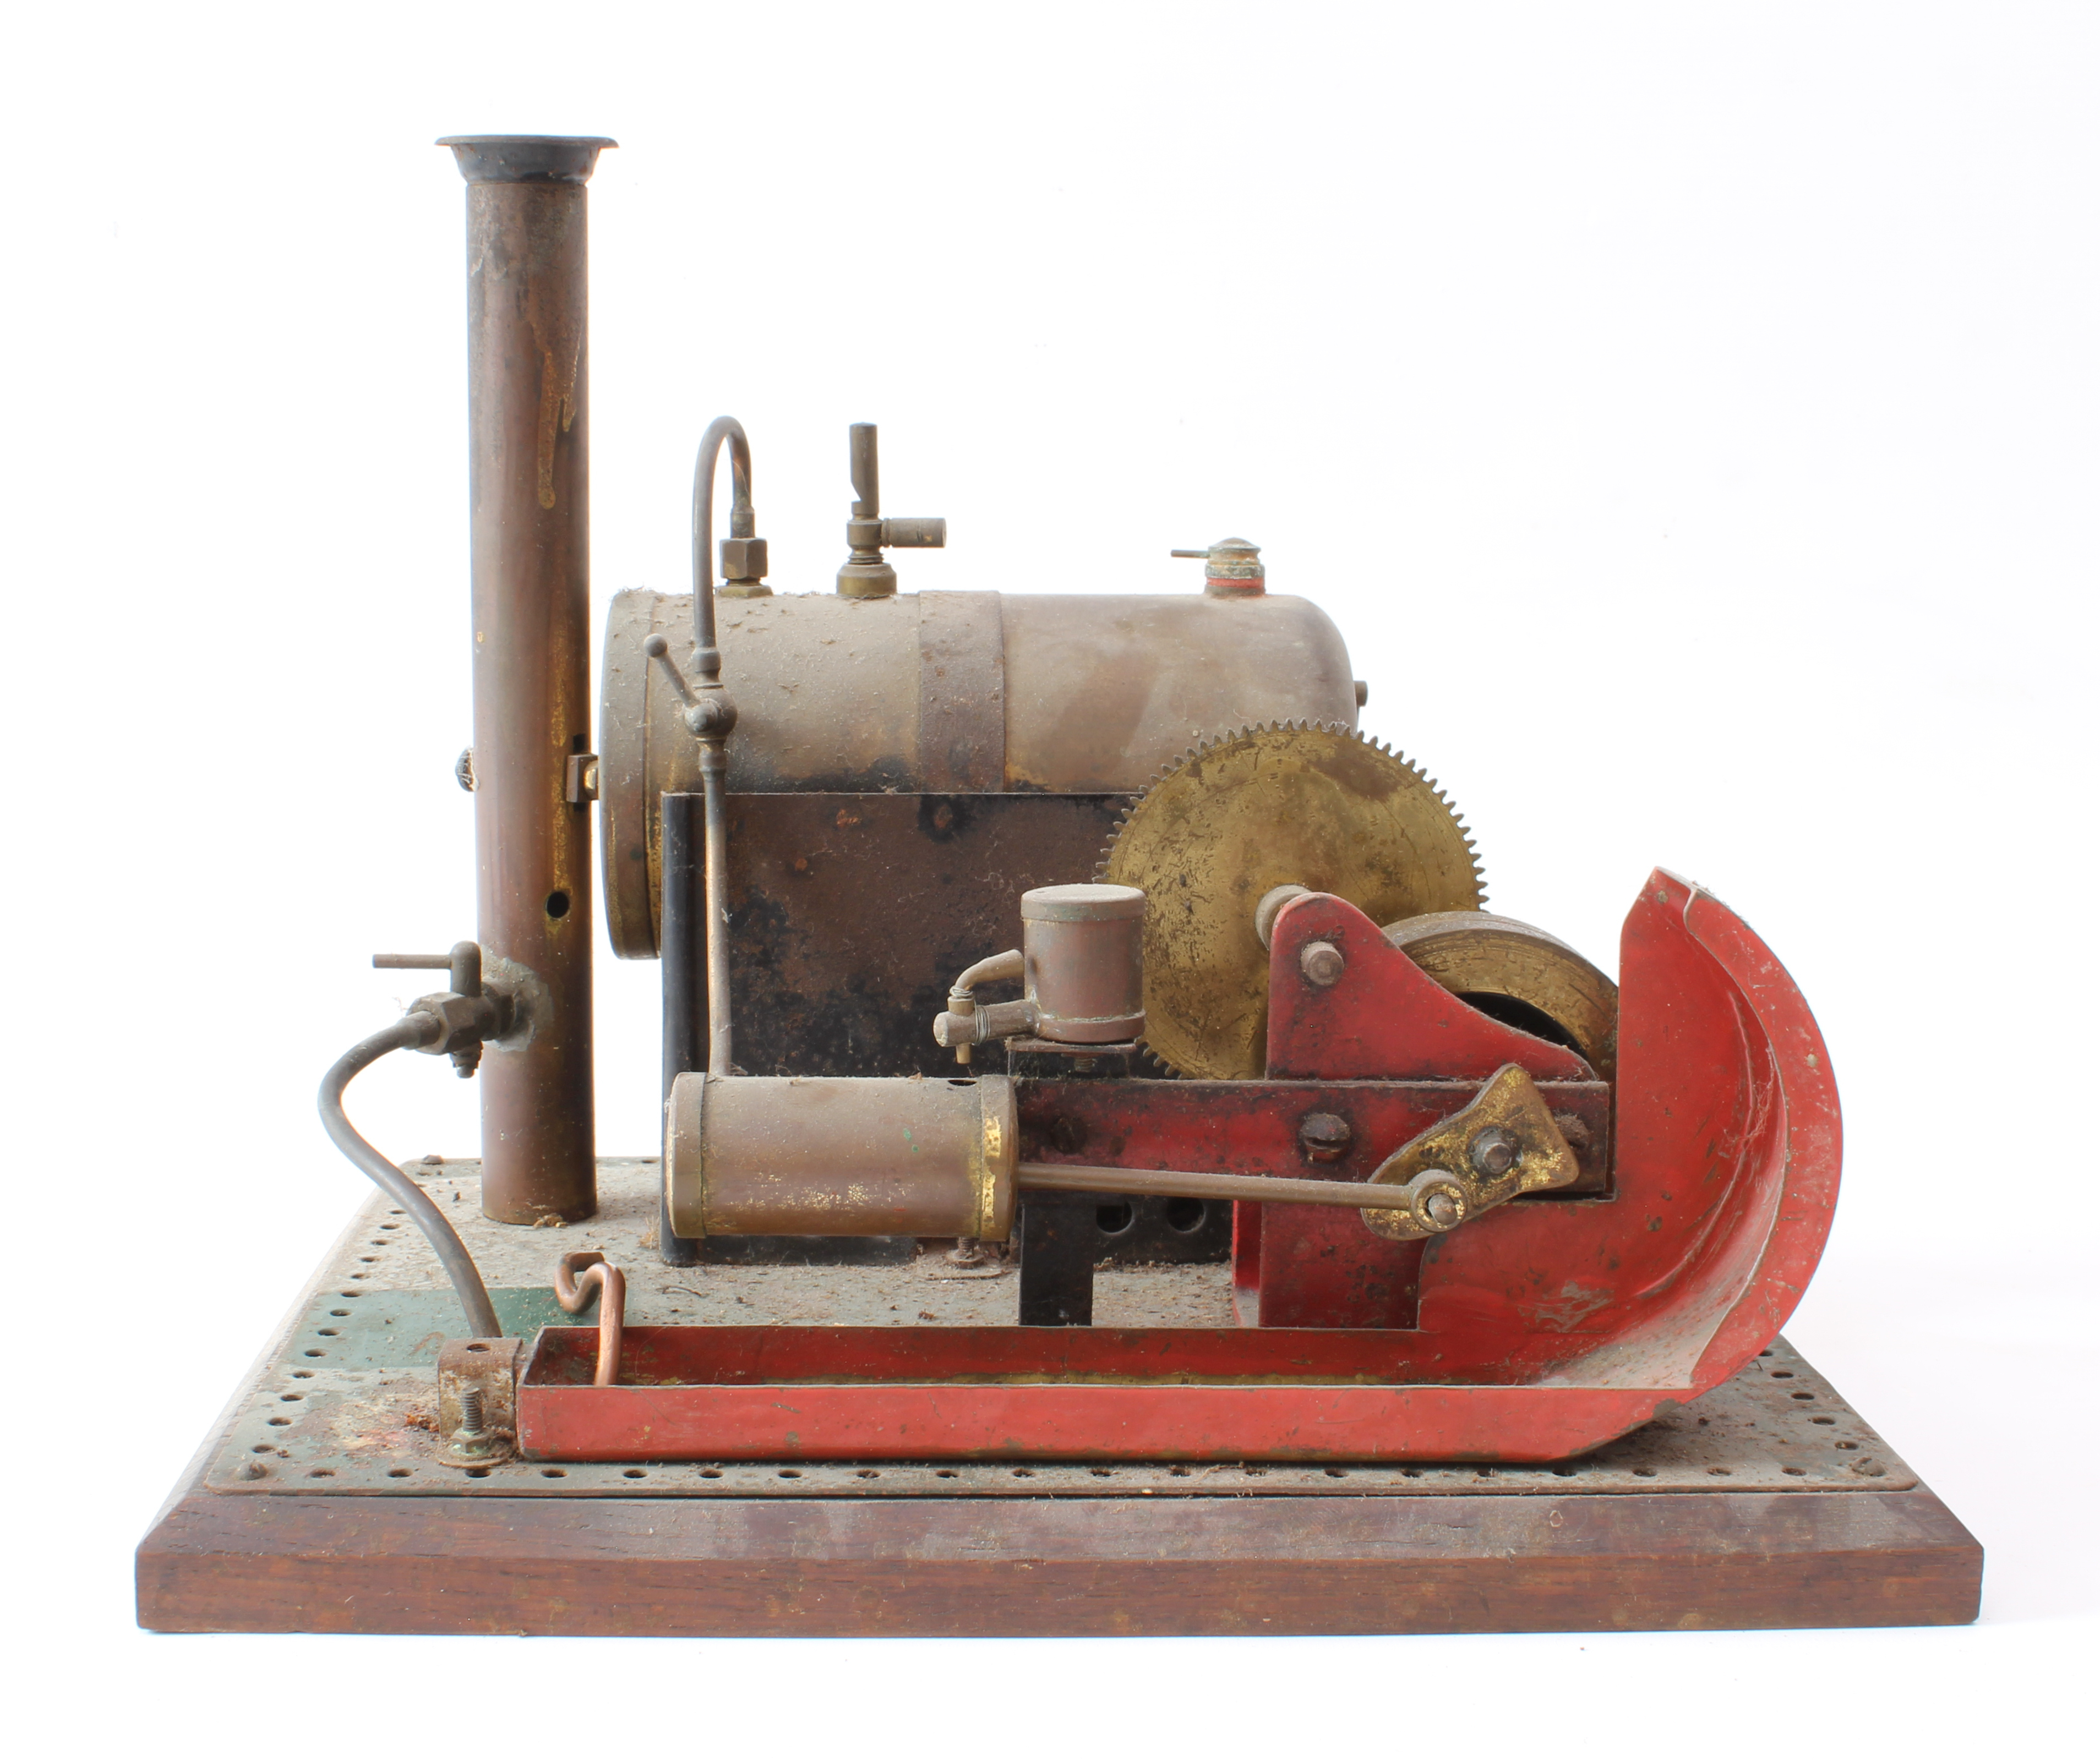 A Bowman Models 101 single cylinder Stationary Steam Engine - with wooden baseplate, 25.75 cm